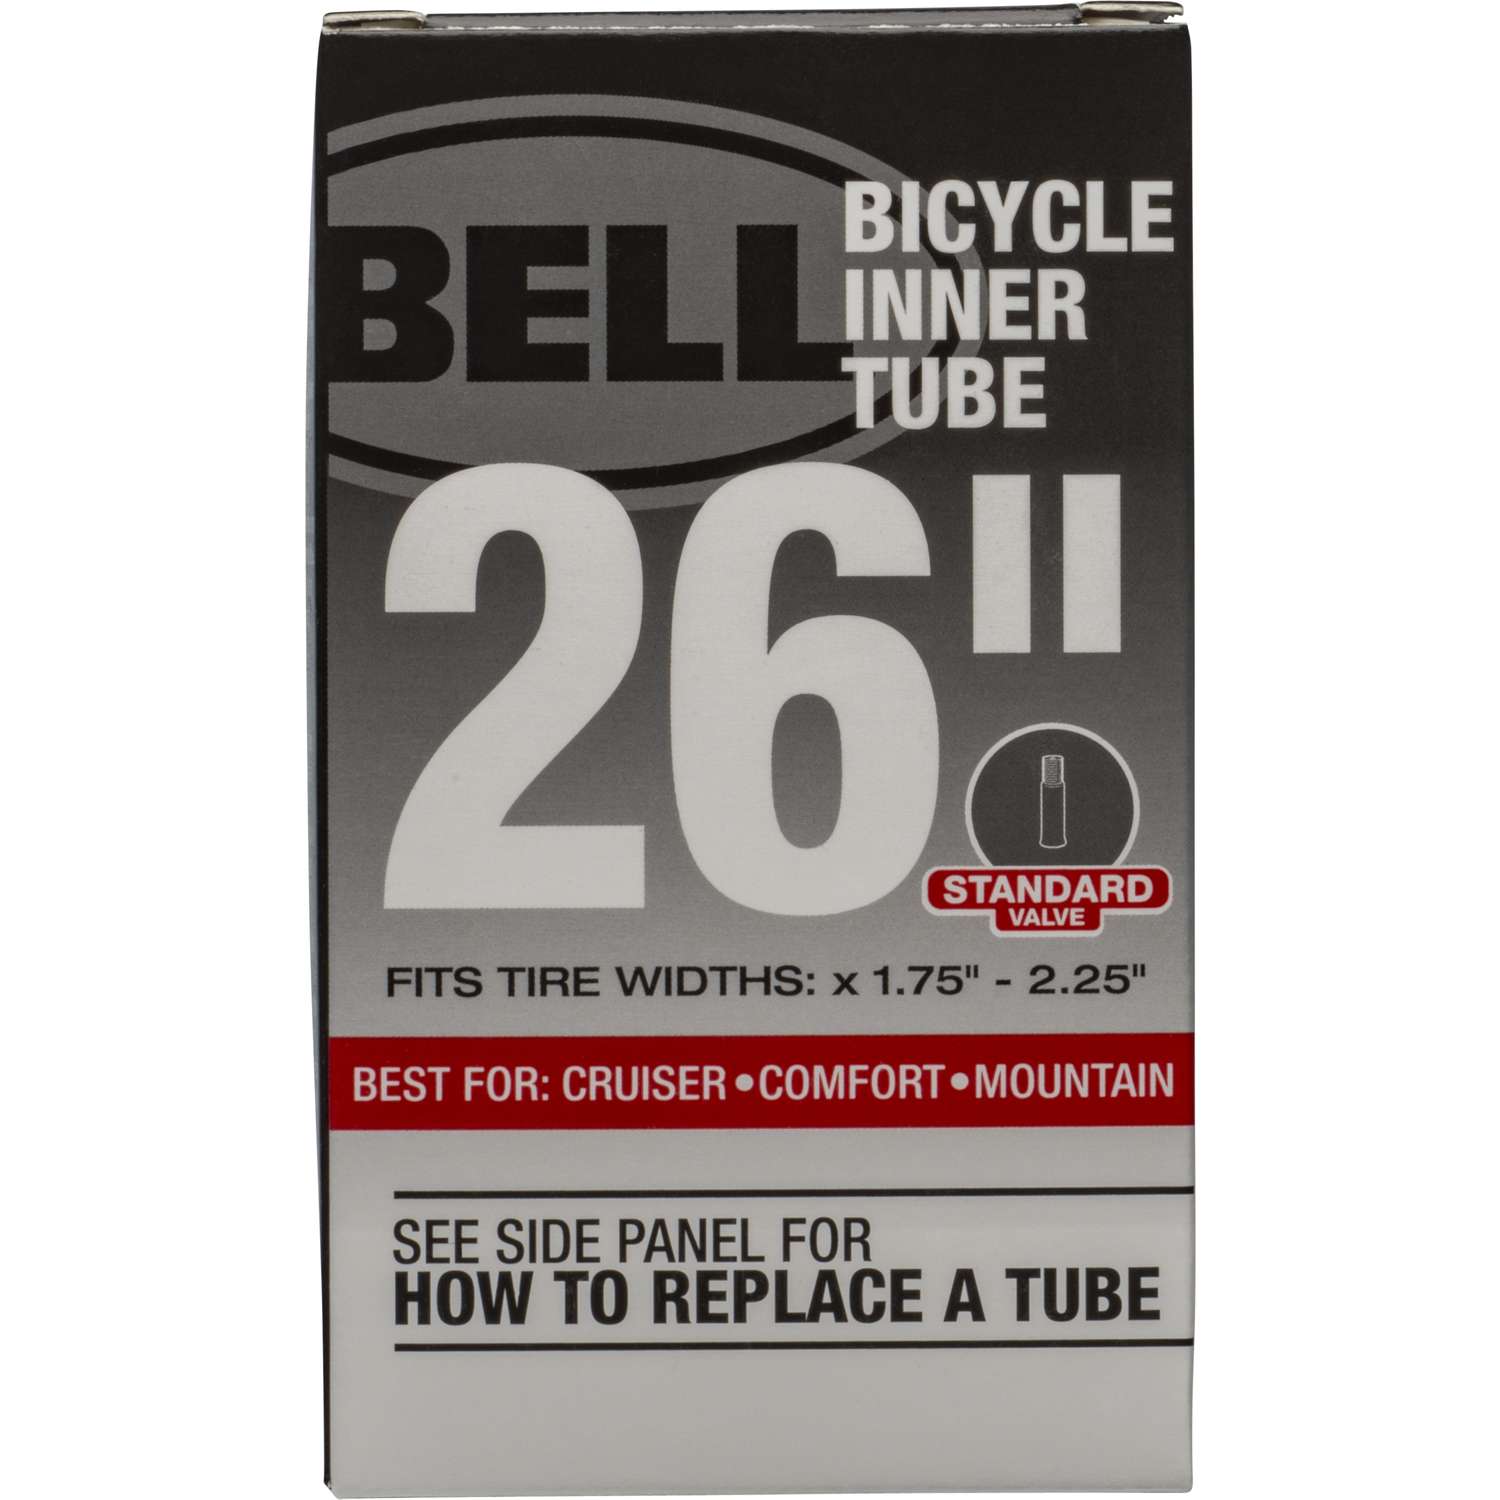 Bell Sports 26" Bicycle Tire Tube for sale online 